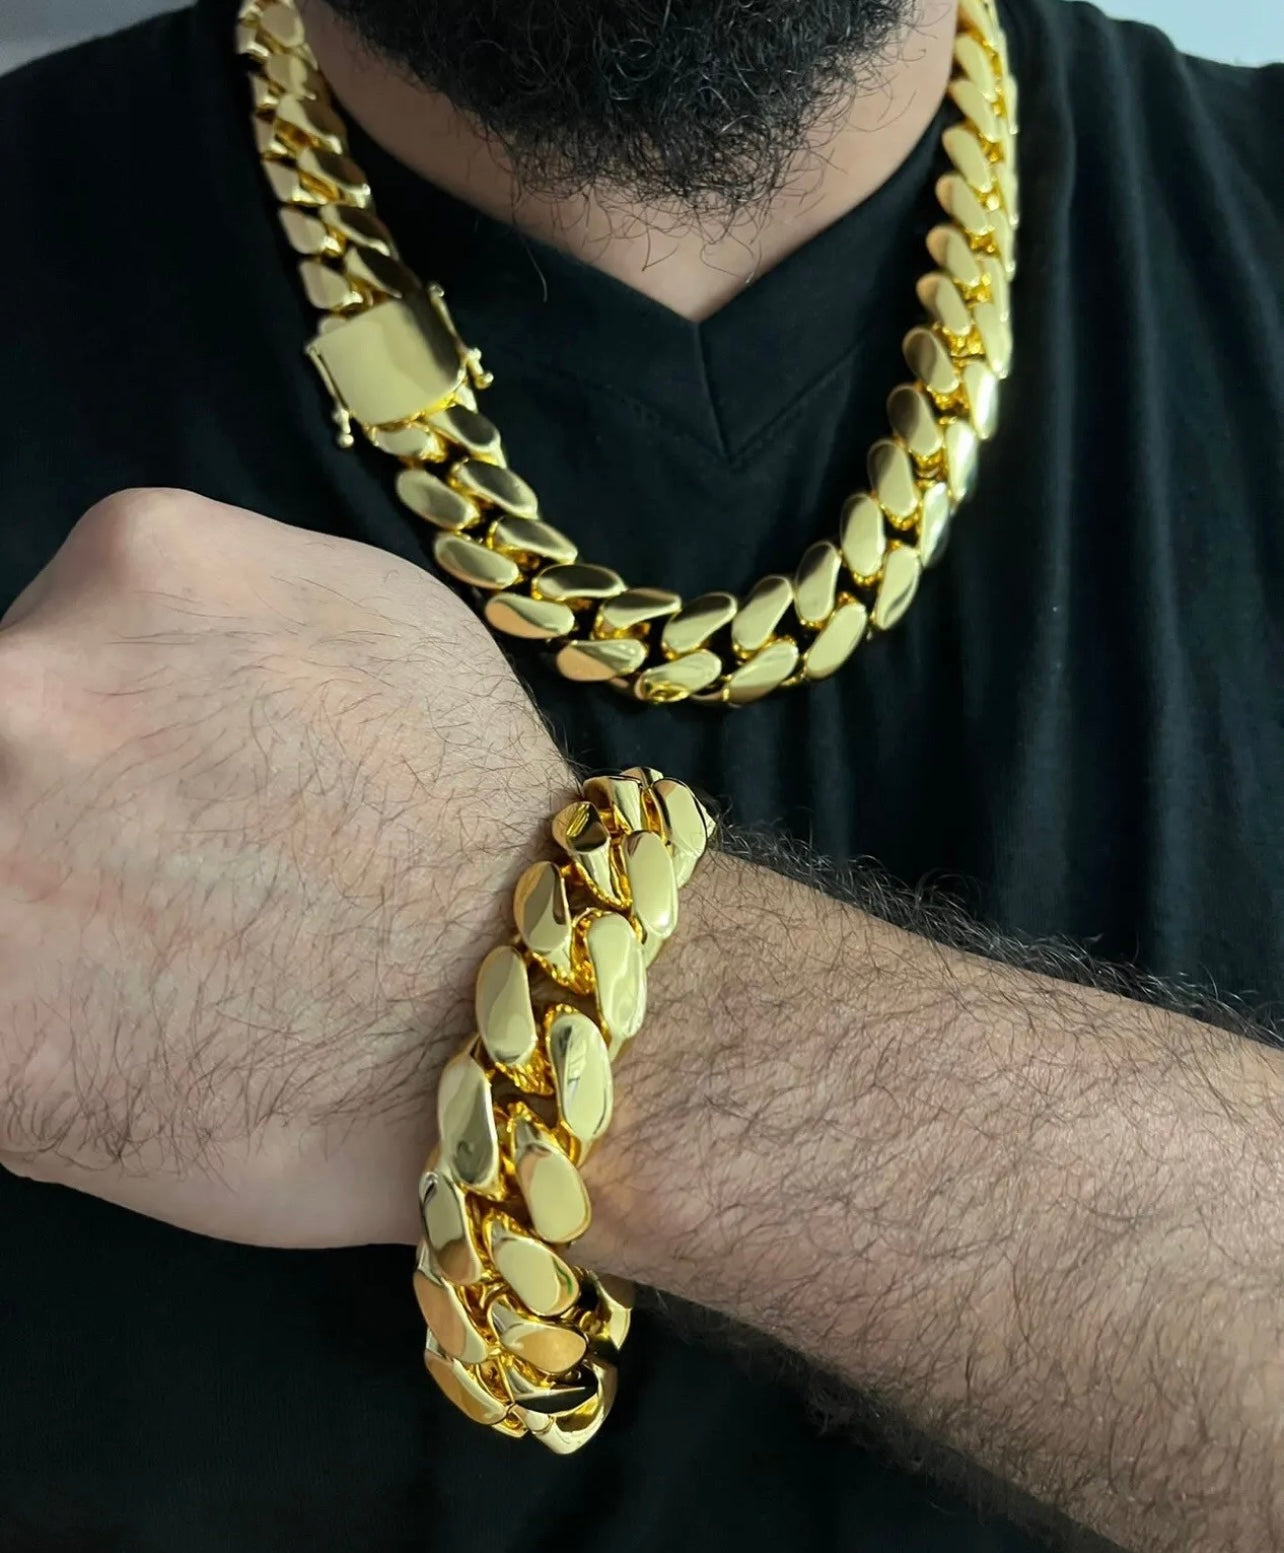 22mm chain and bracelet set gold bonded thick heavy set